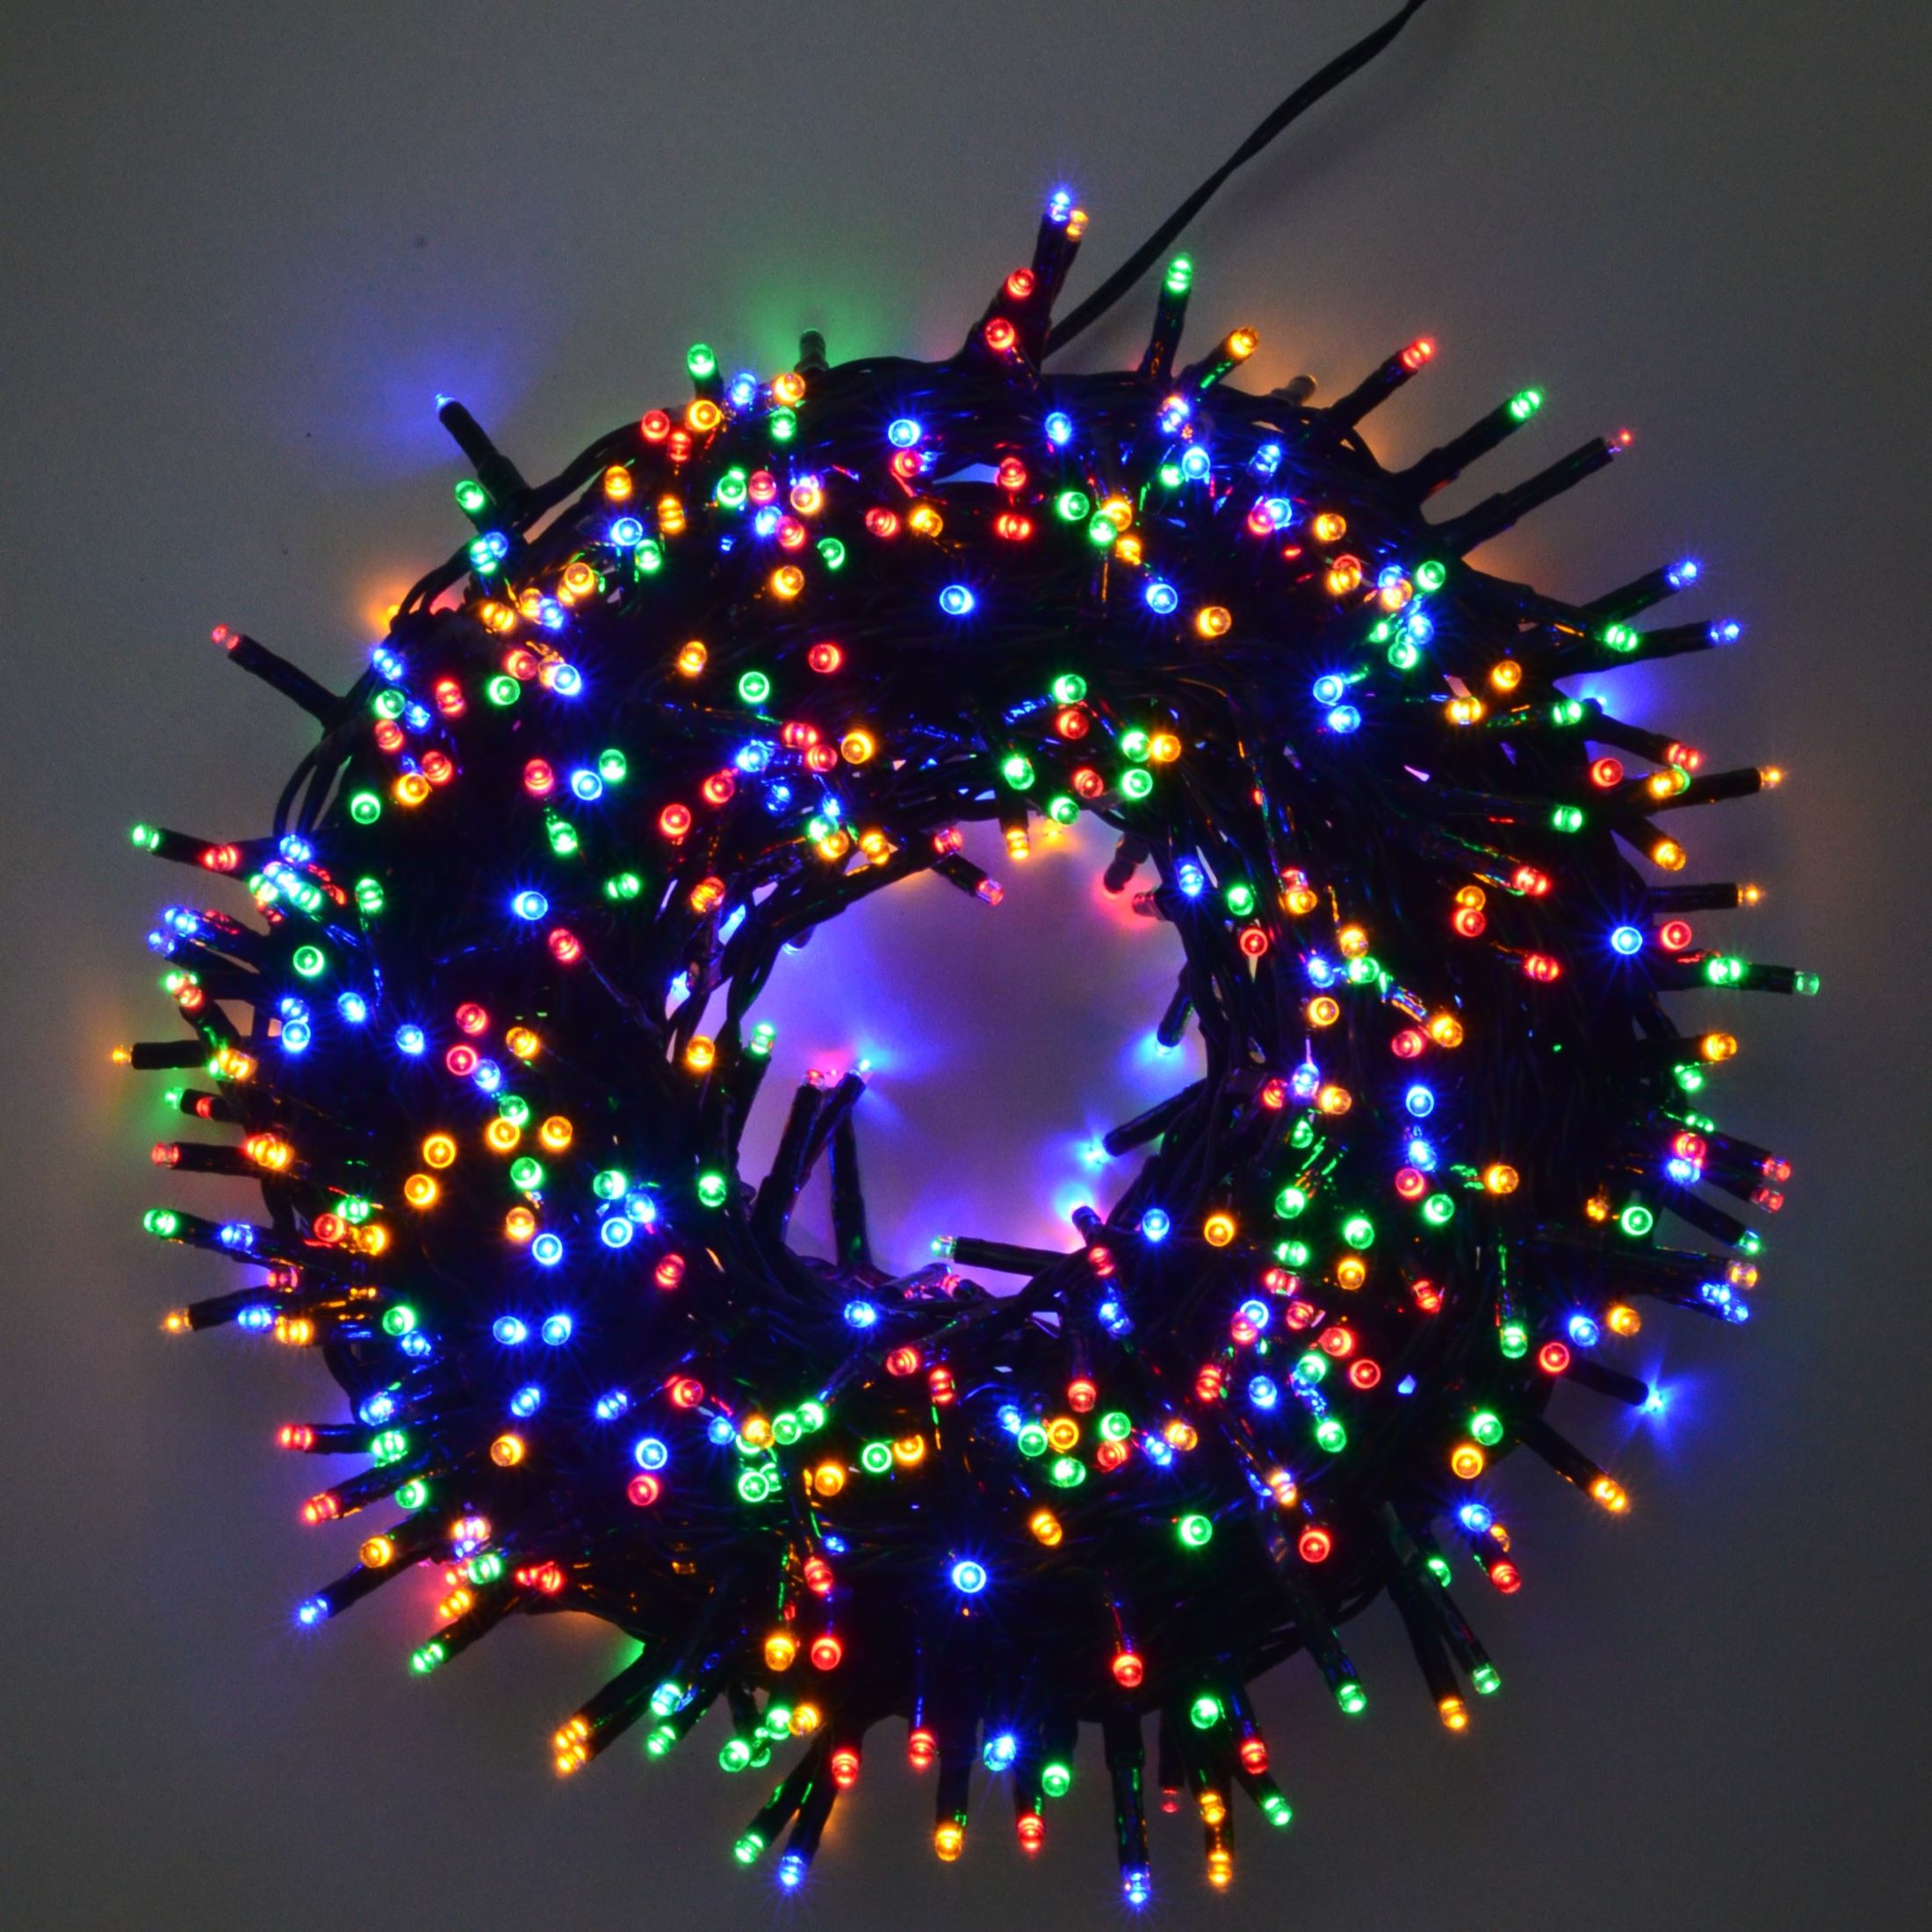 Colored bubble ball light string